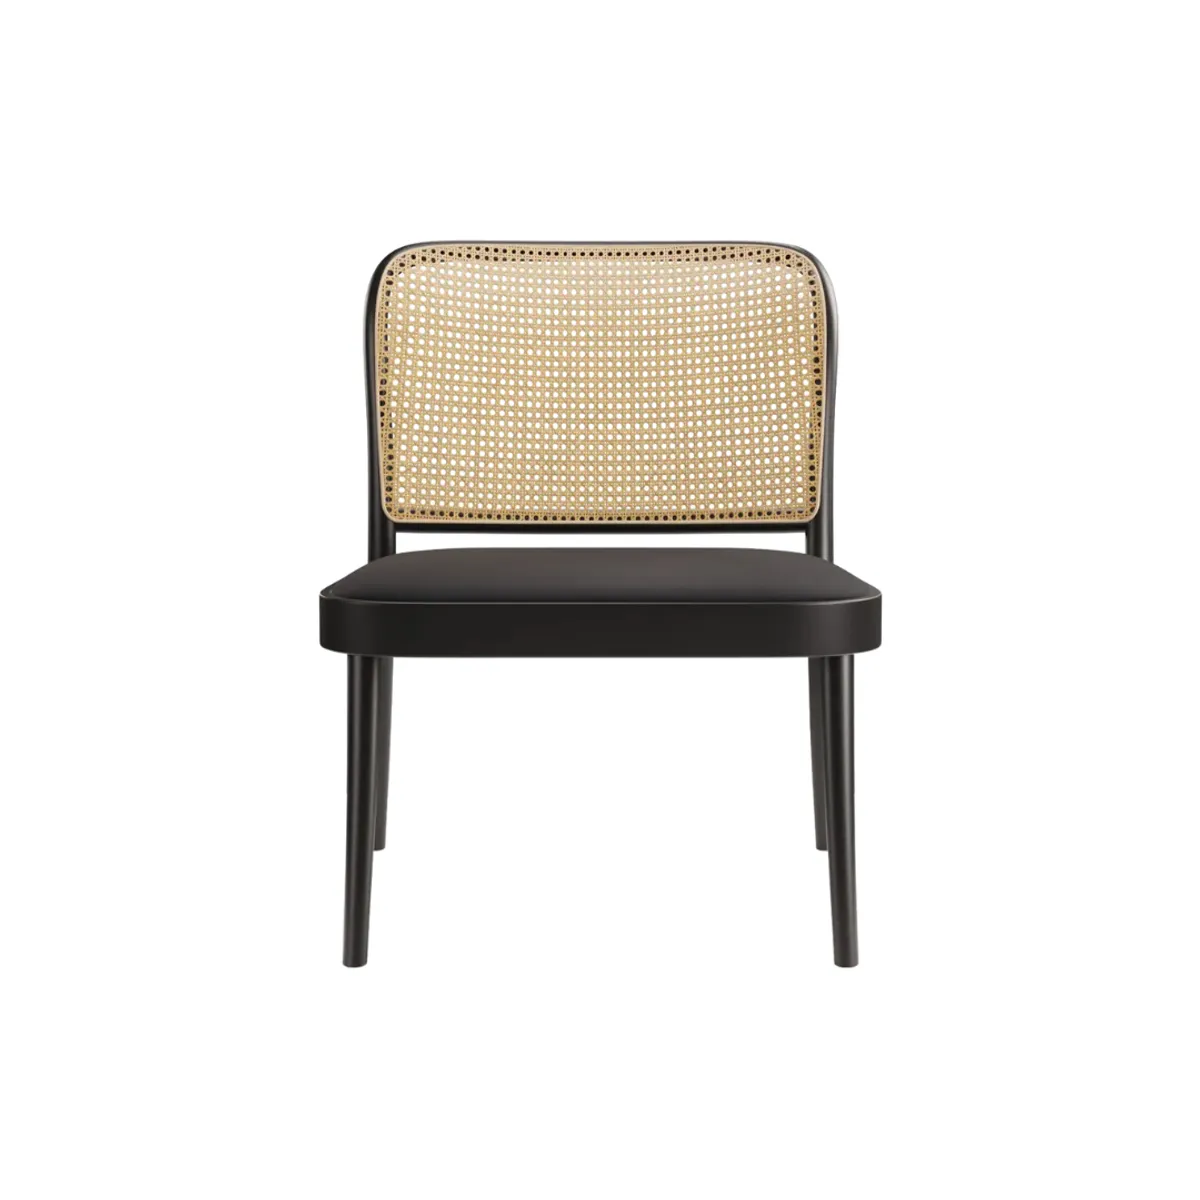 Bombay lounge chair 3